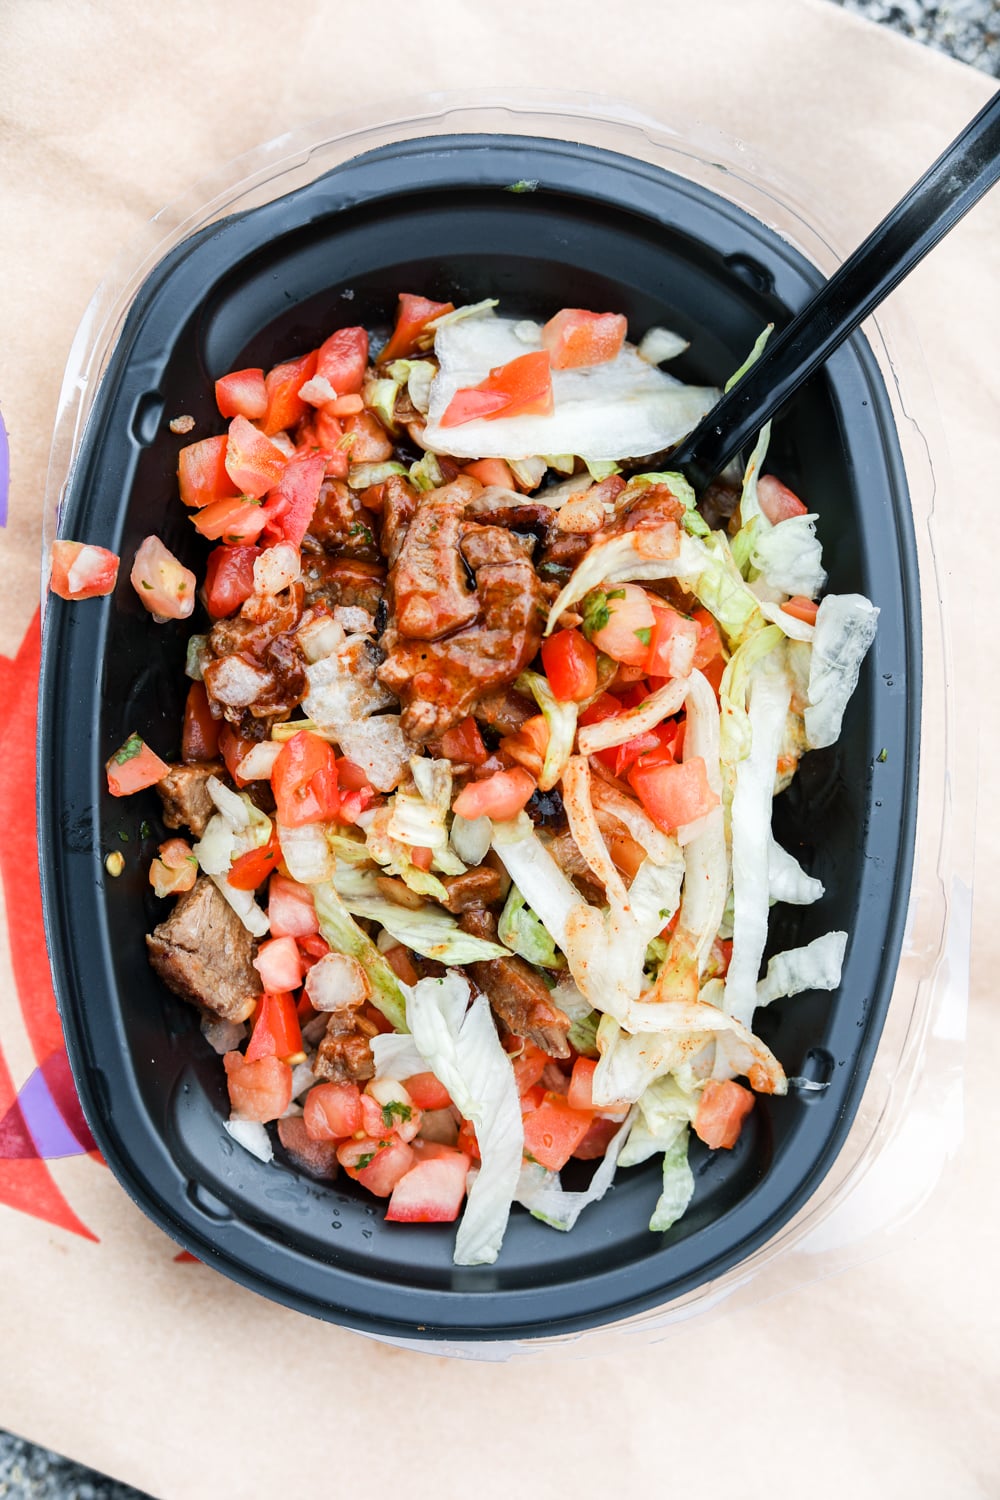 Shredded lettuce, pico de gallo, and chopped steak, topped with hot sauce in a black bowl.